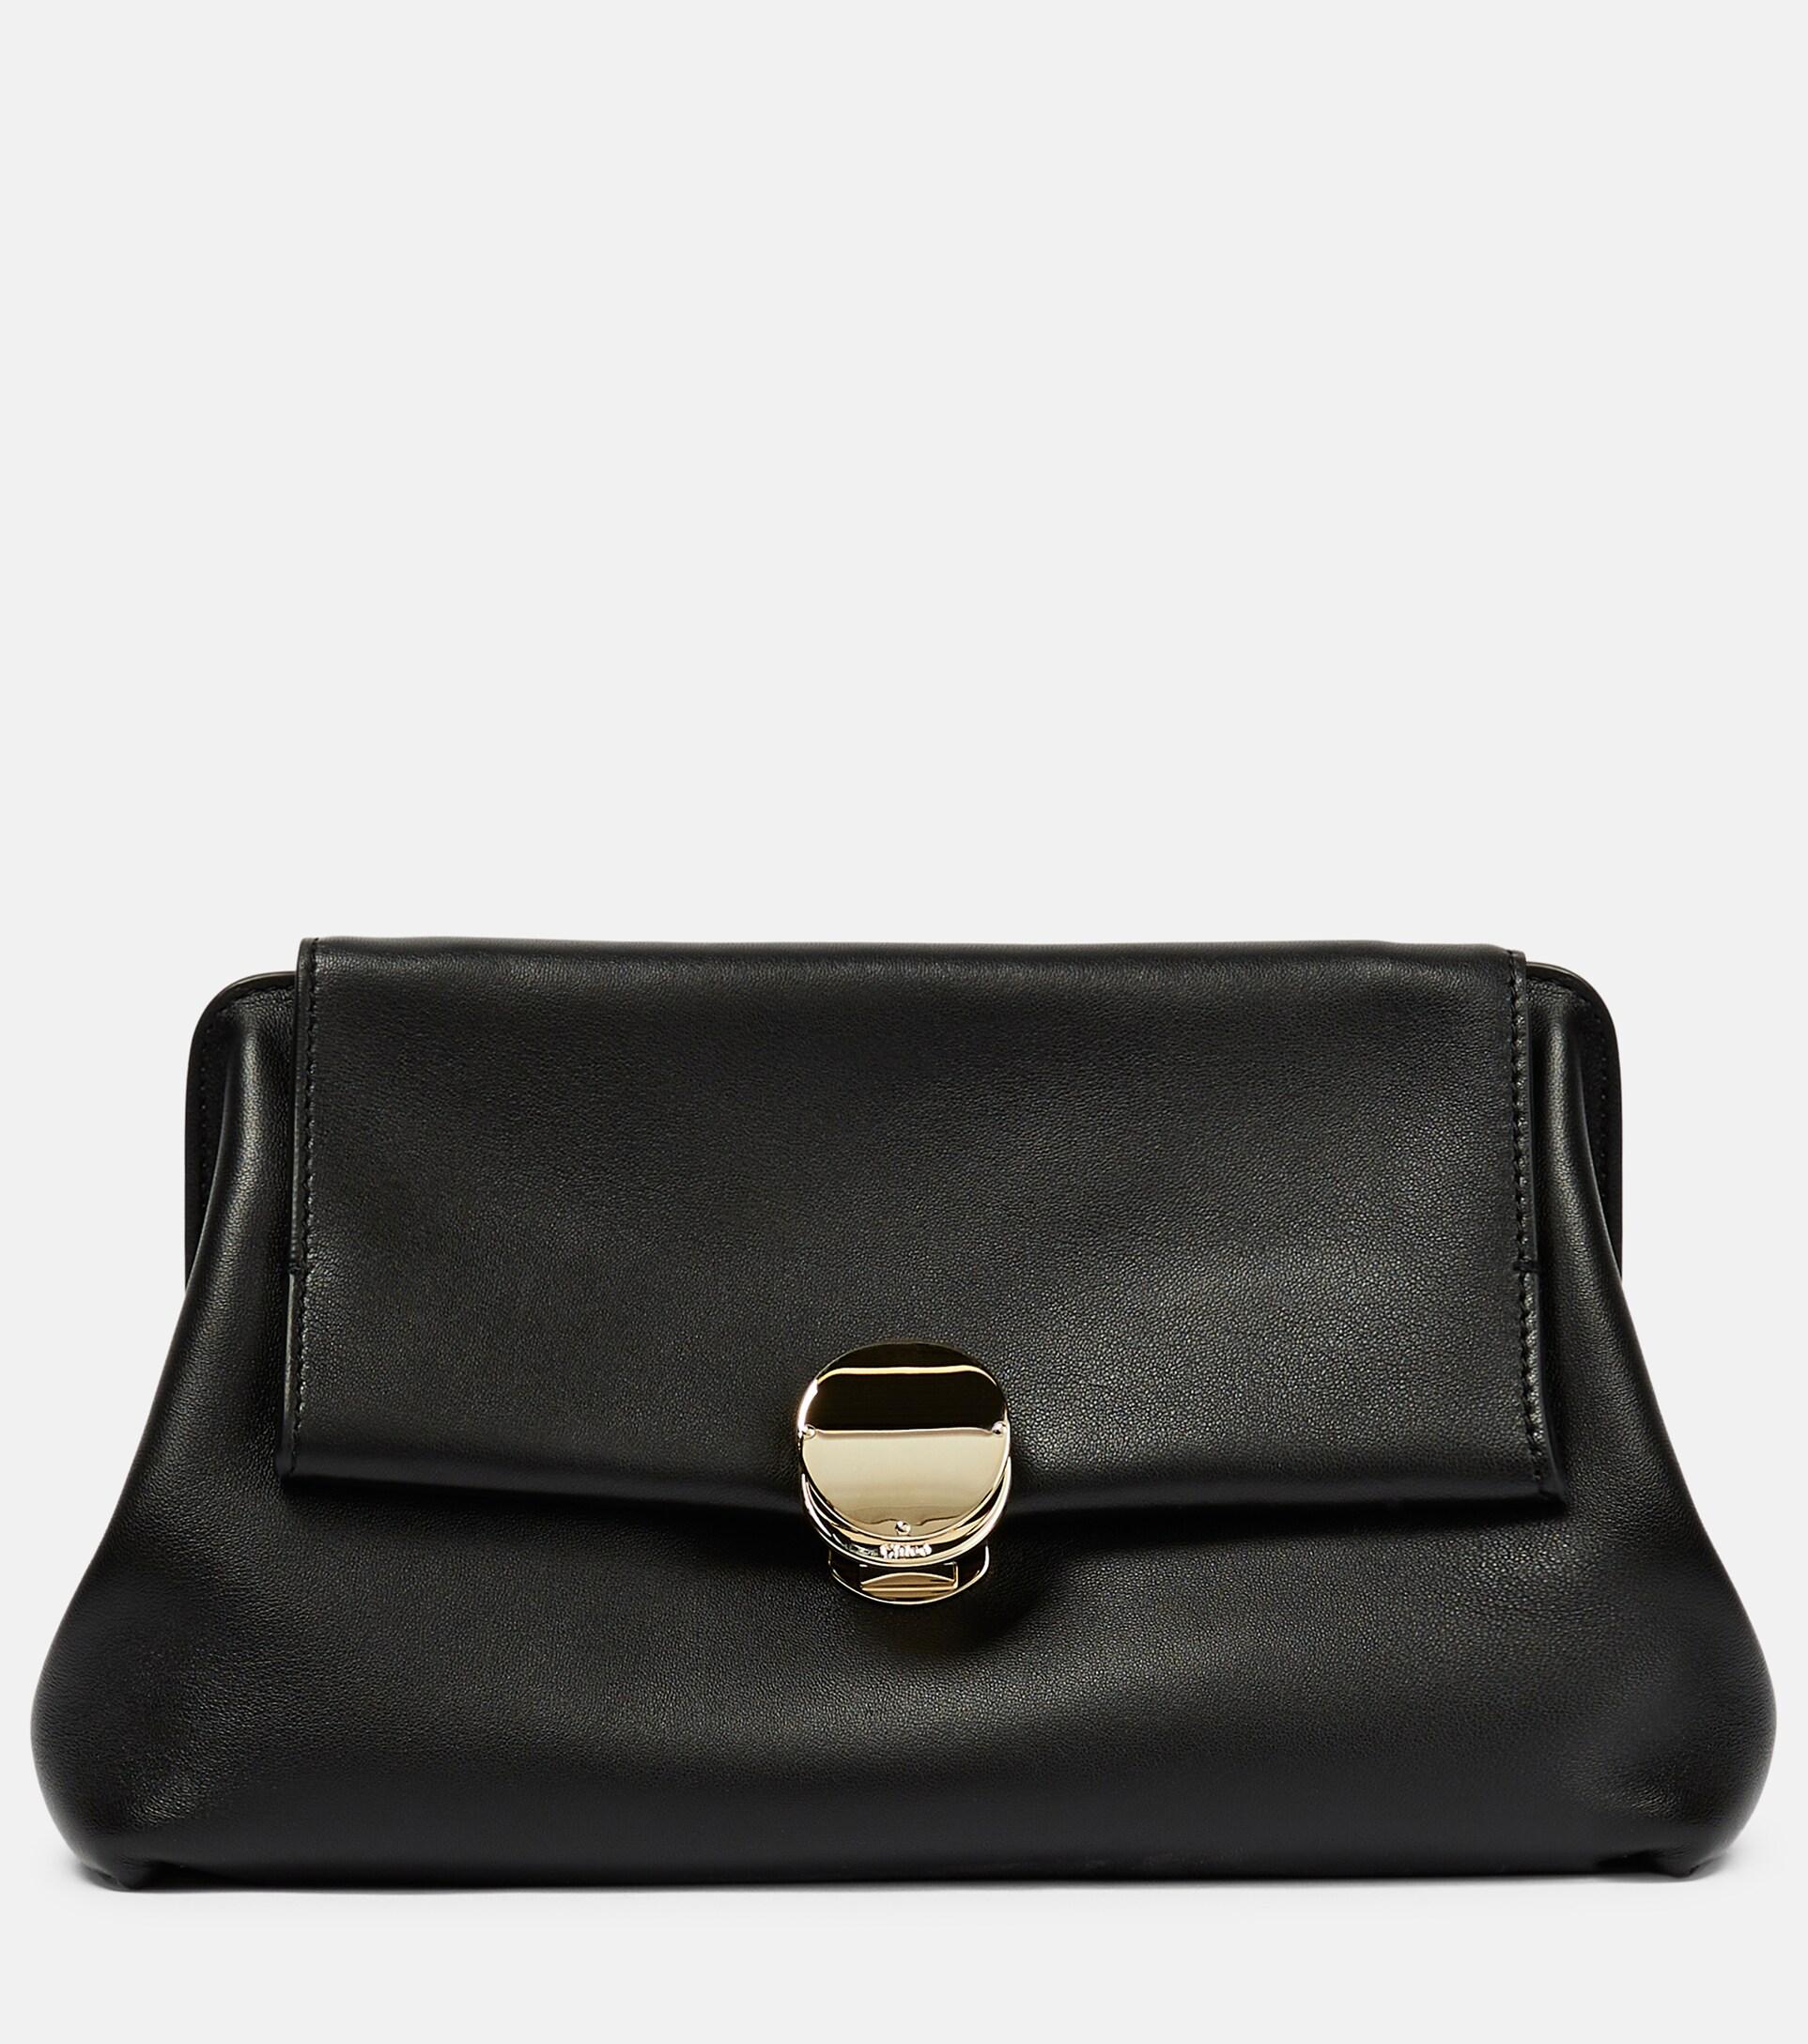 Chloé Penelope Small Leather Clutch in Black | Lyst